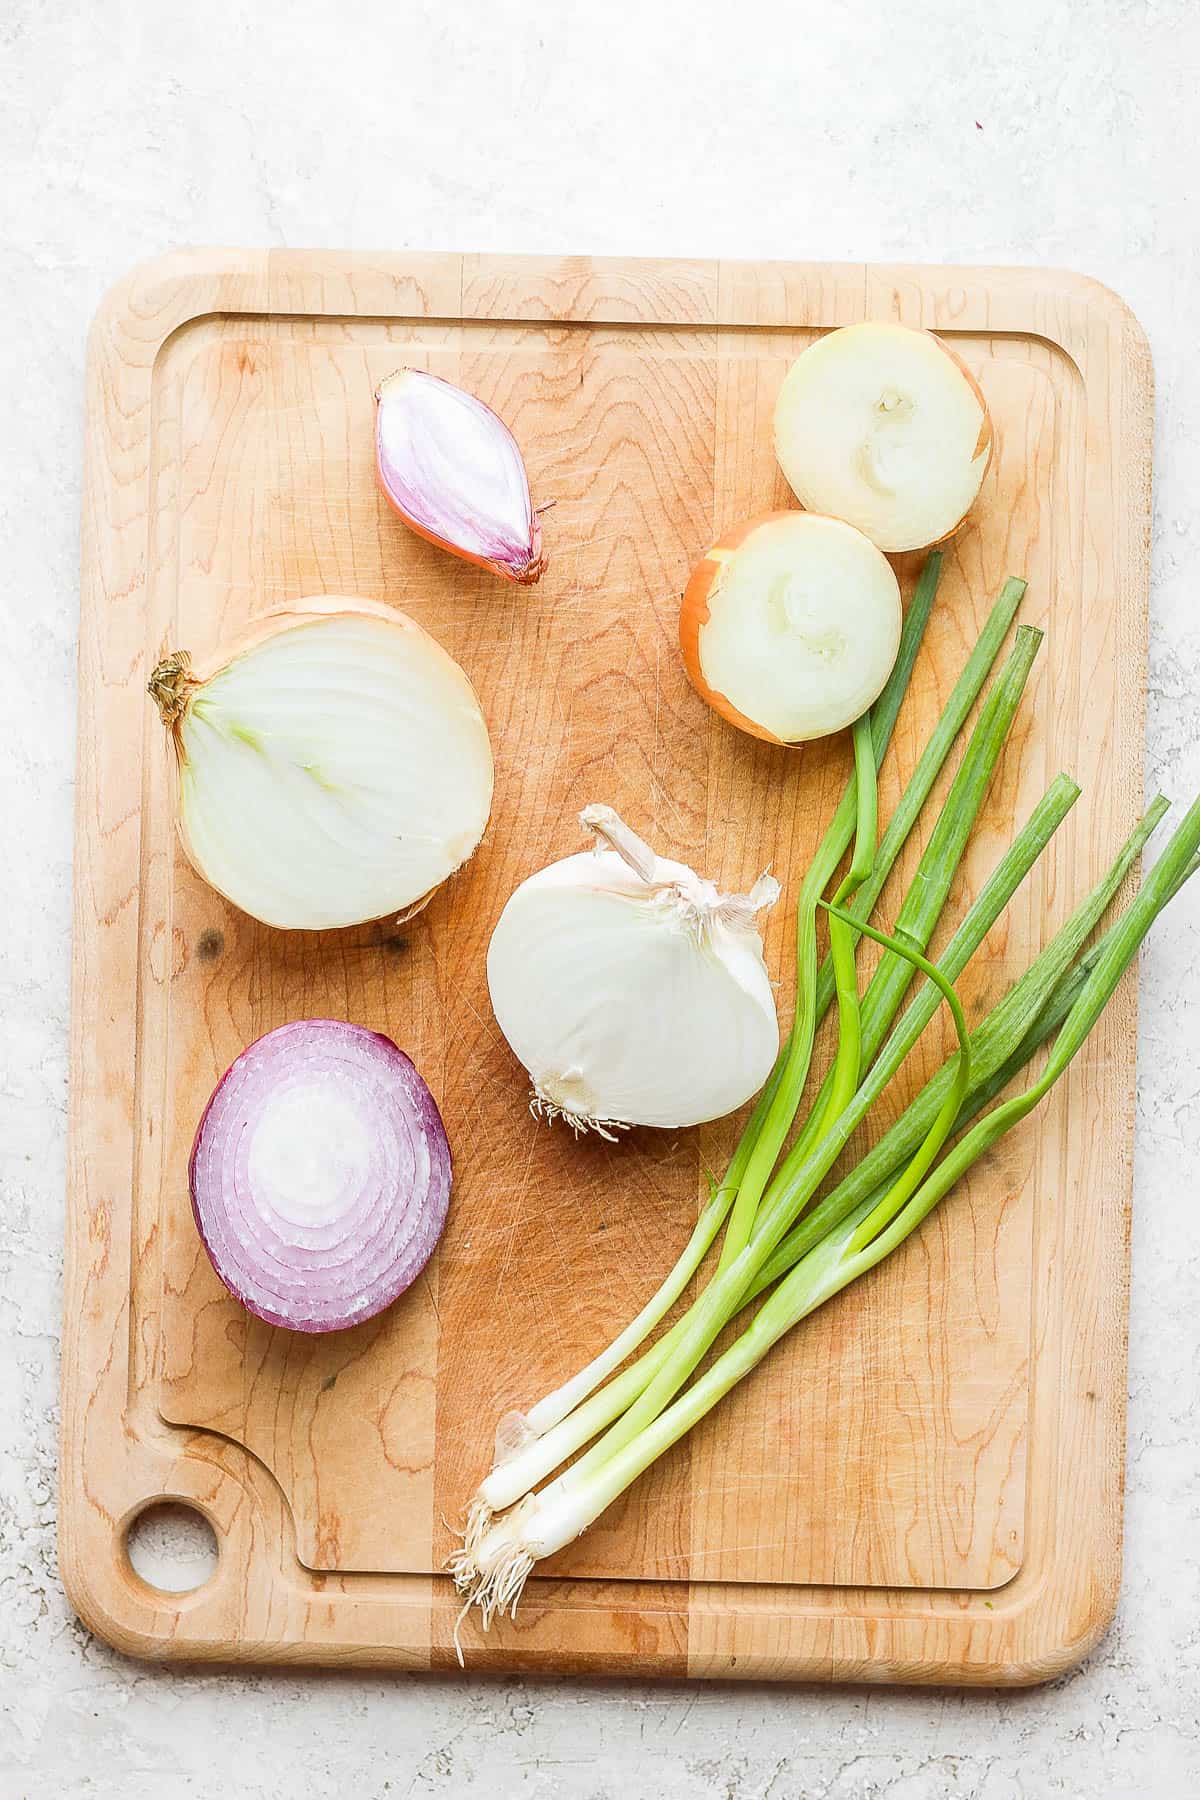 Cutting board with 6 types of onions cut in half.